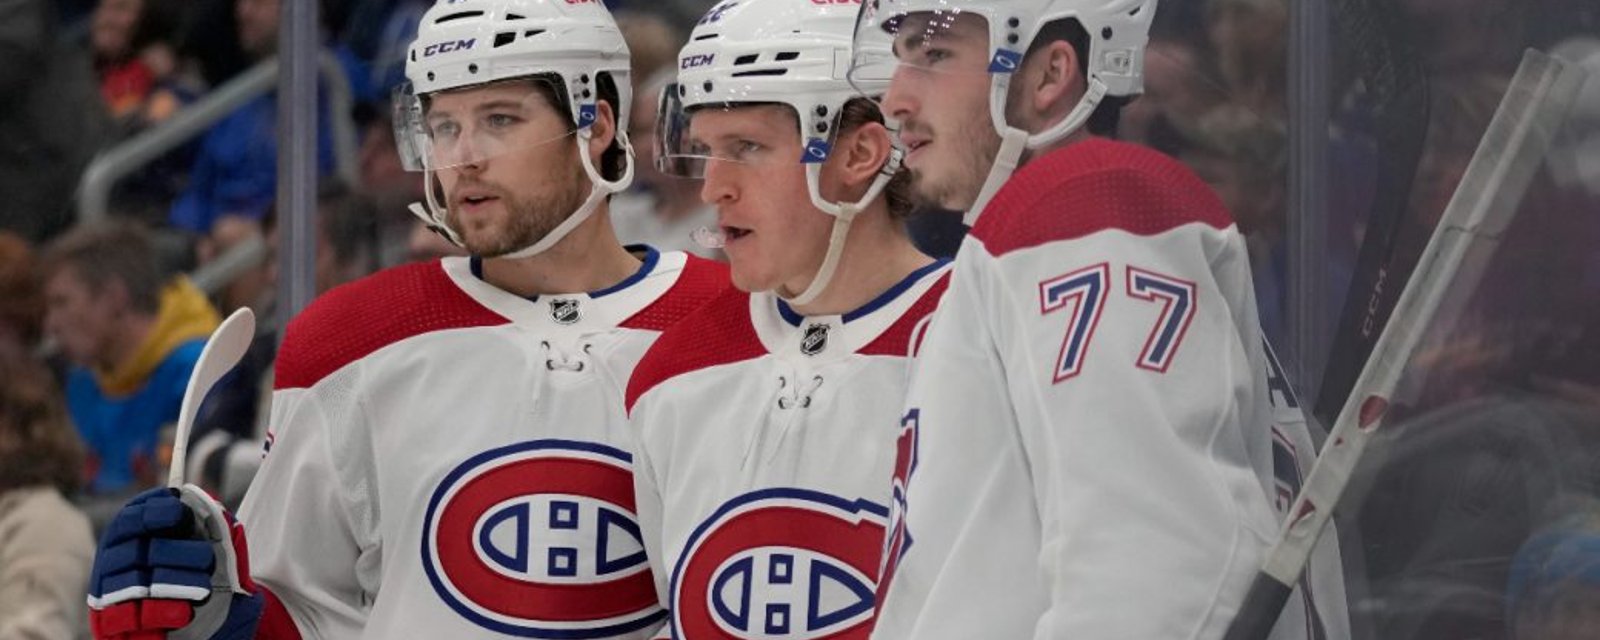 Canadiens set embarrassing record in last night’s loss